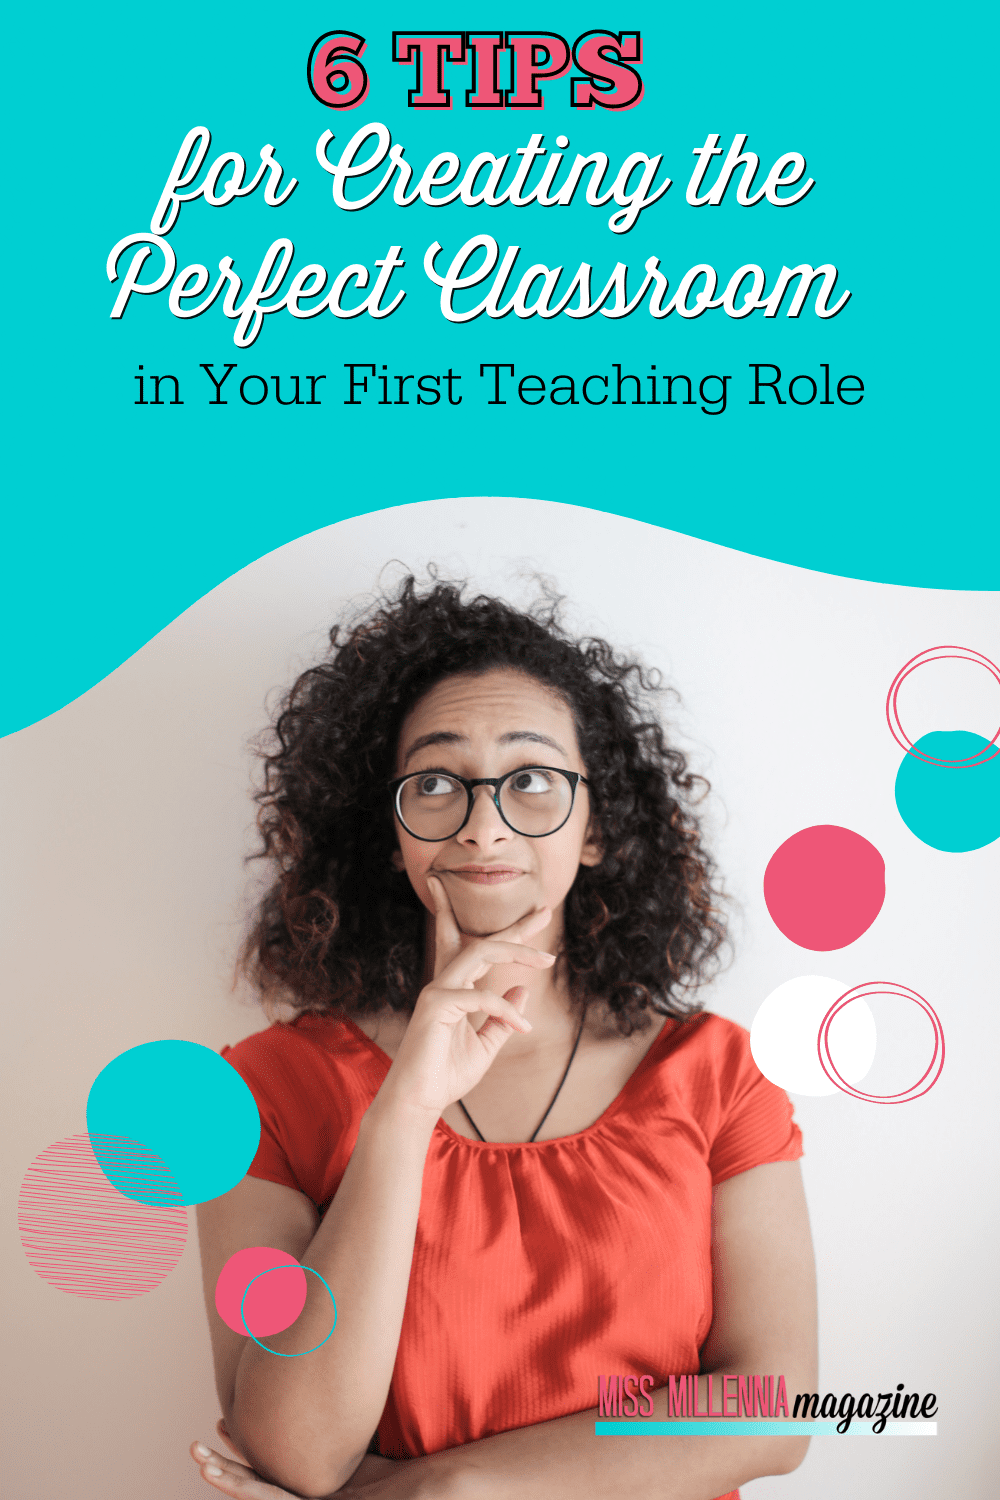 6 Tips for Creating the Perfect Classroom in Your First Teaching Role